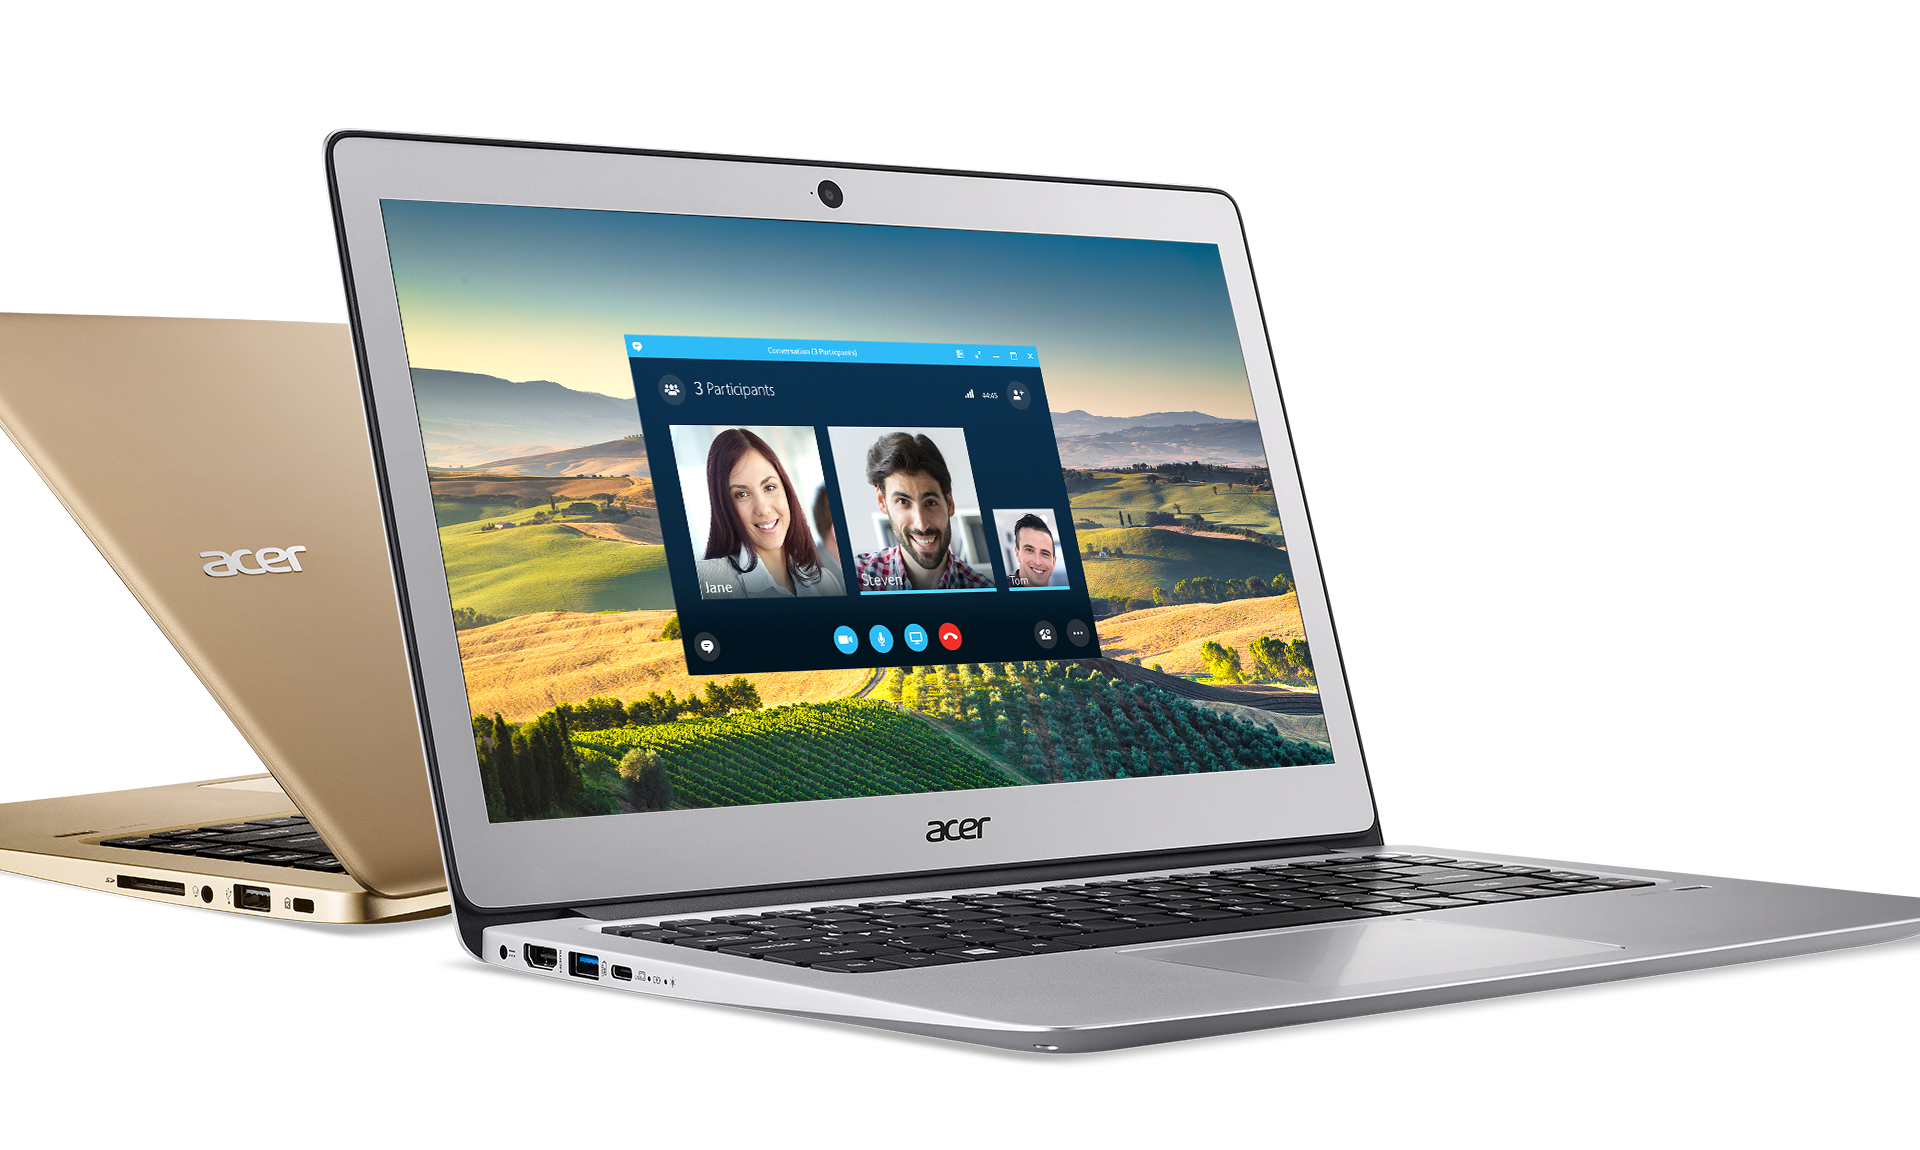 Acer 003. Acer Swift 3 sf314-54. Ноутбук Acer Swift 3. Acer Swift 3 (sf314-51). Ультрабук Асер Свифт 3.